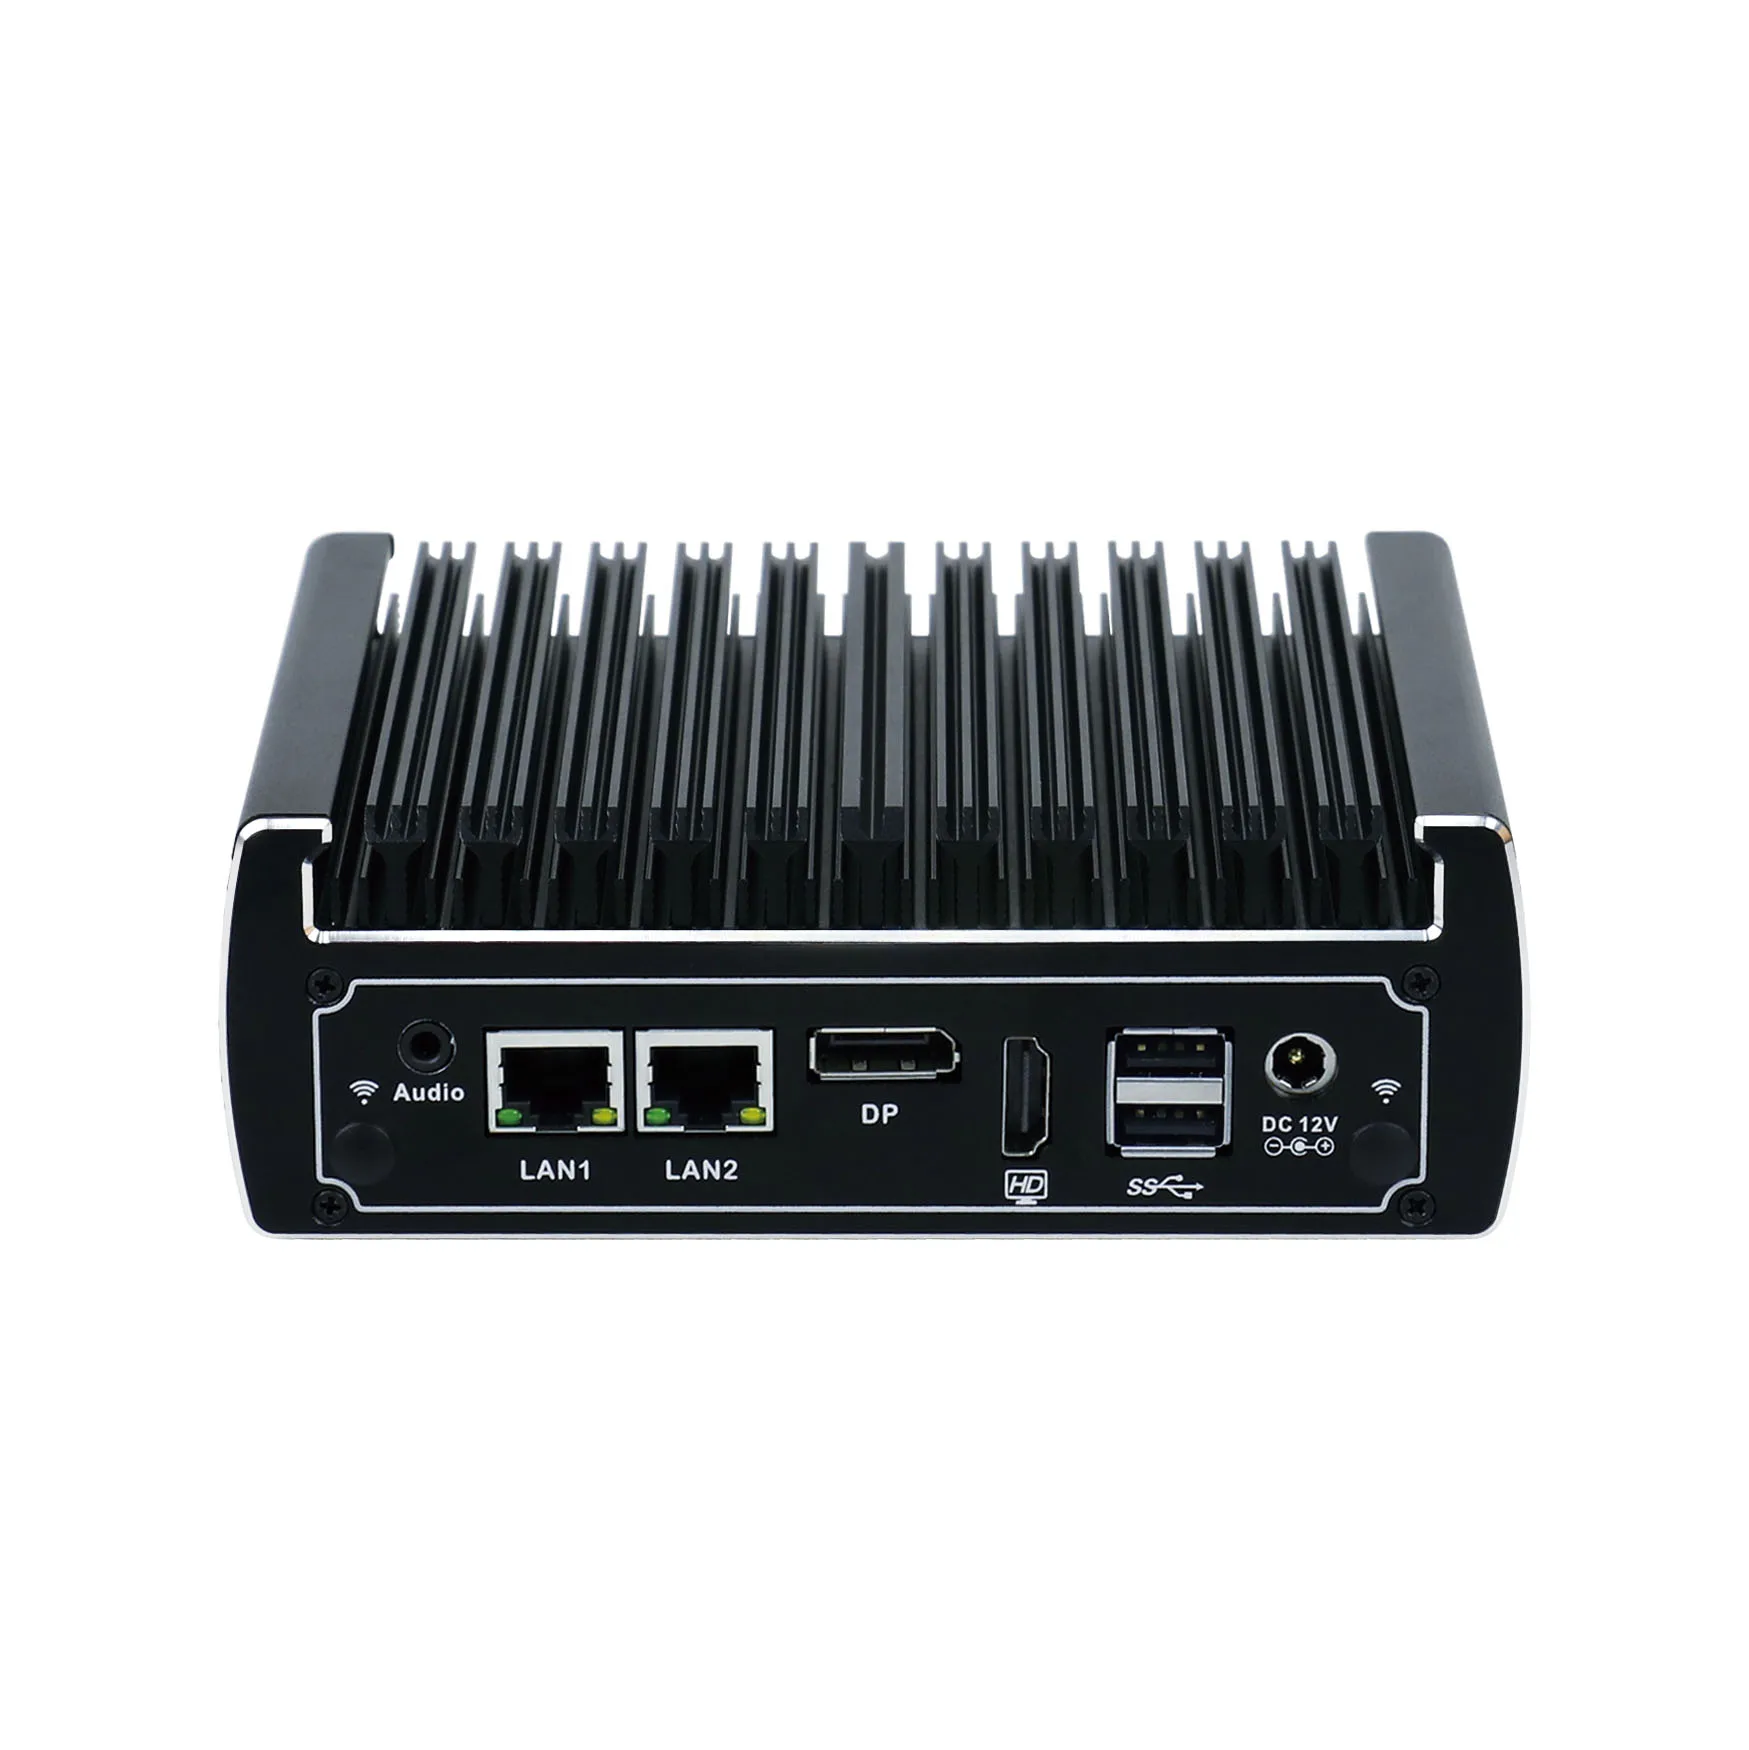 

Yanling mini pc intel kaby Lake Core i5 7200u Dual Core CPU fanless office computer support dual lan and RS232 COMs